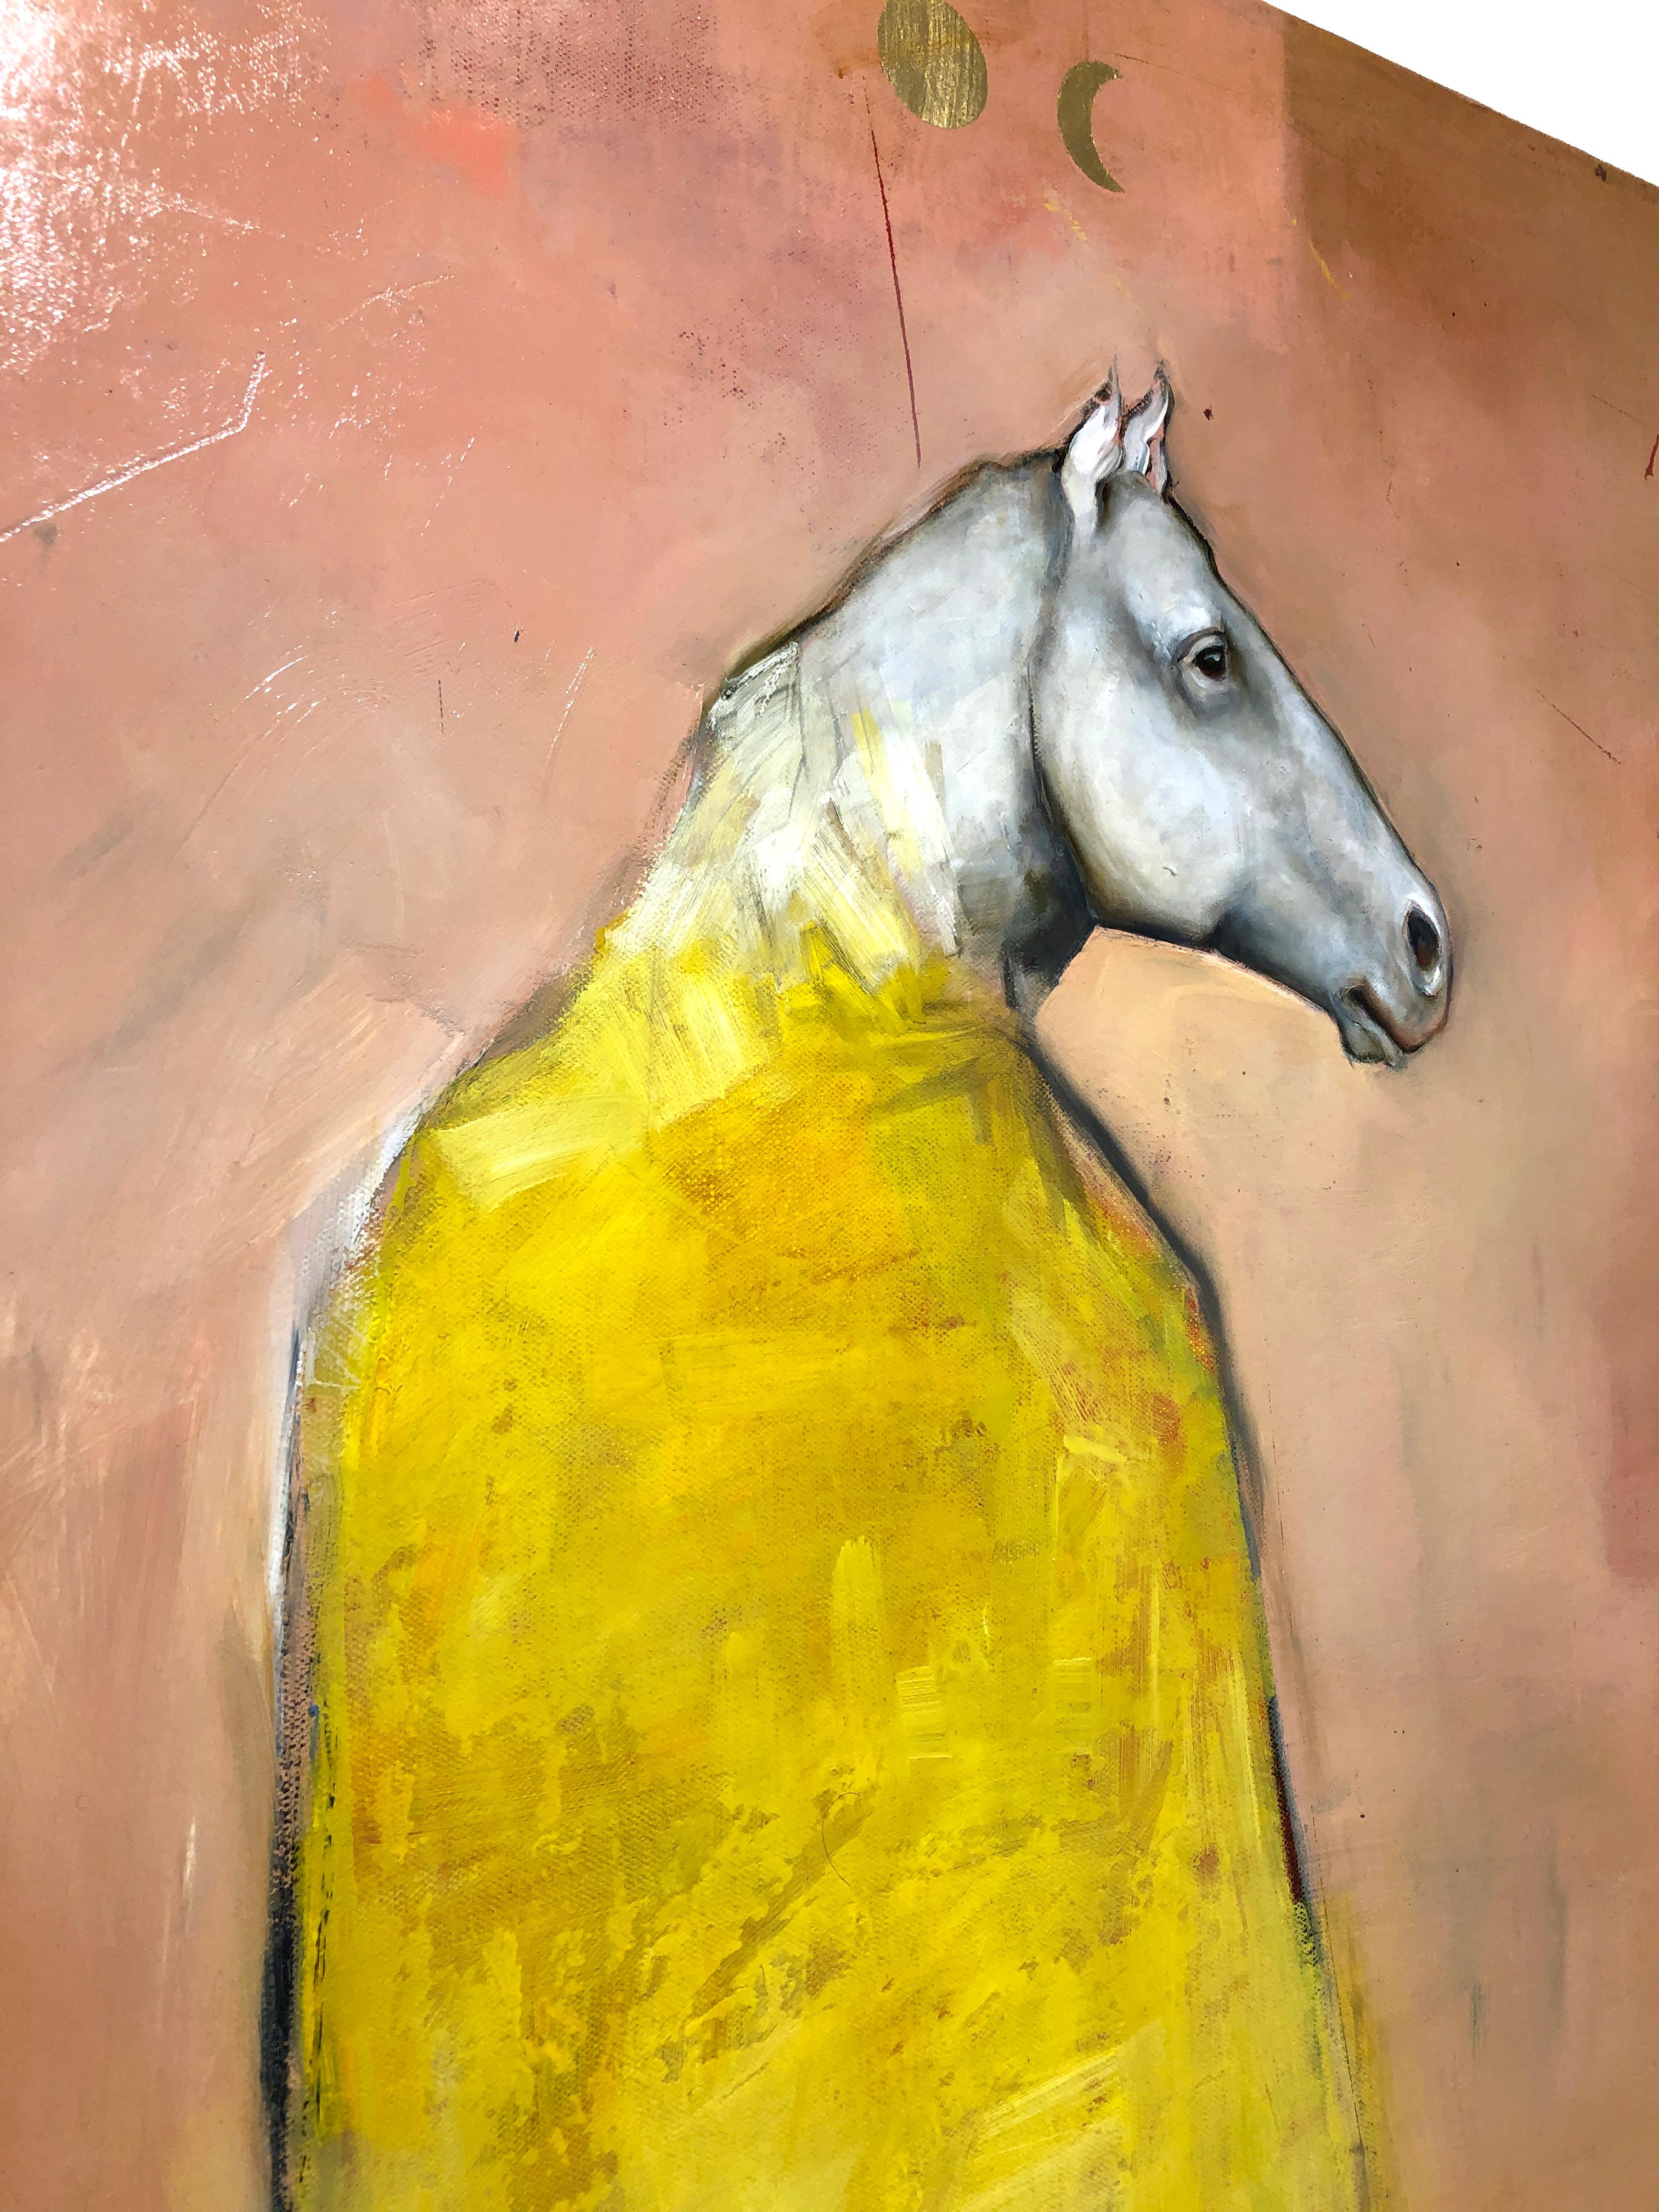 Eos -Mythical horse figure, Oil on canvas, pop contemporary whimsical painting 2